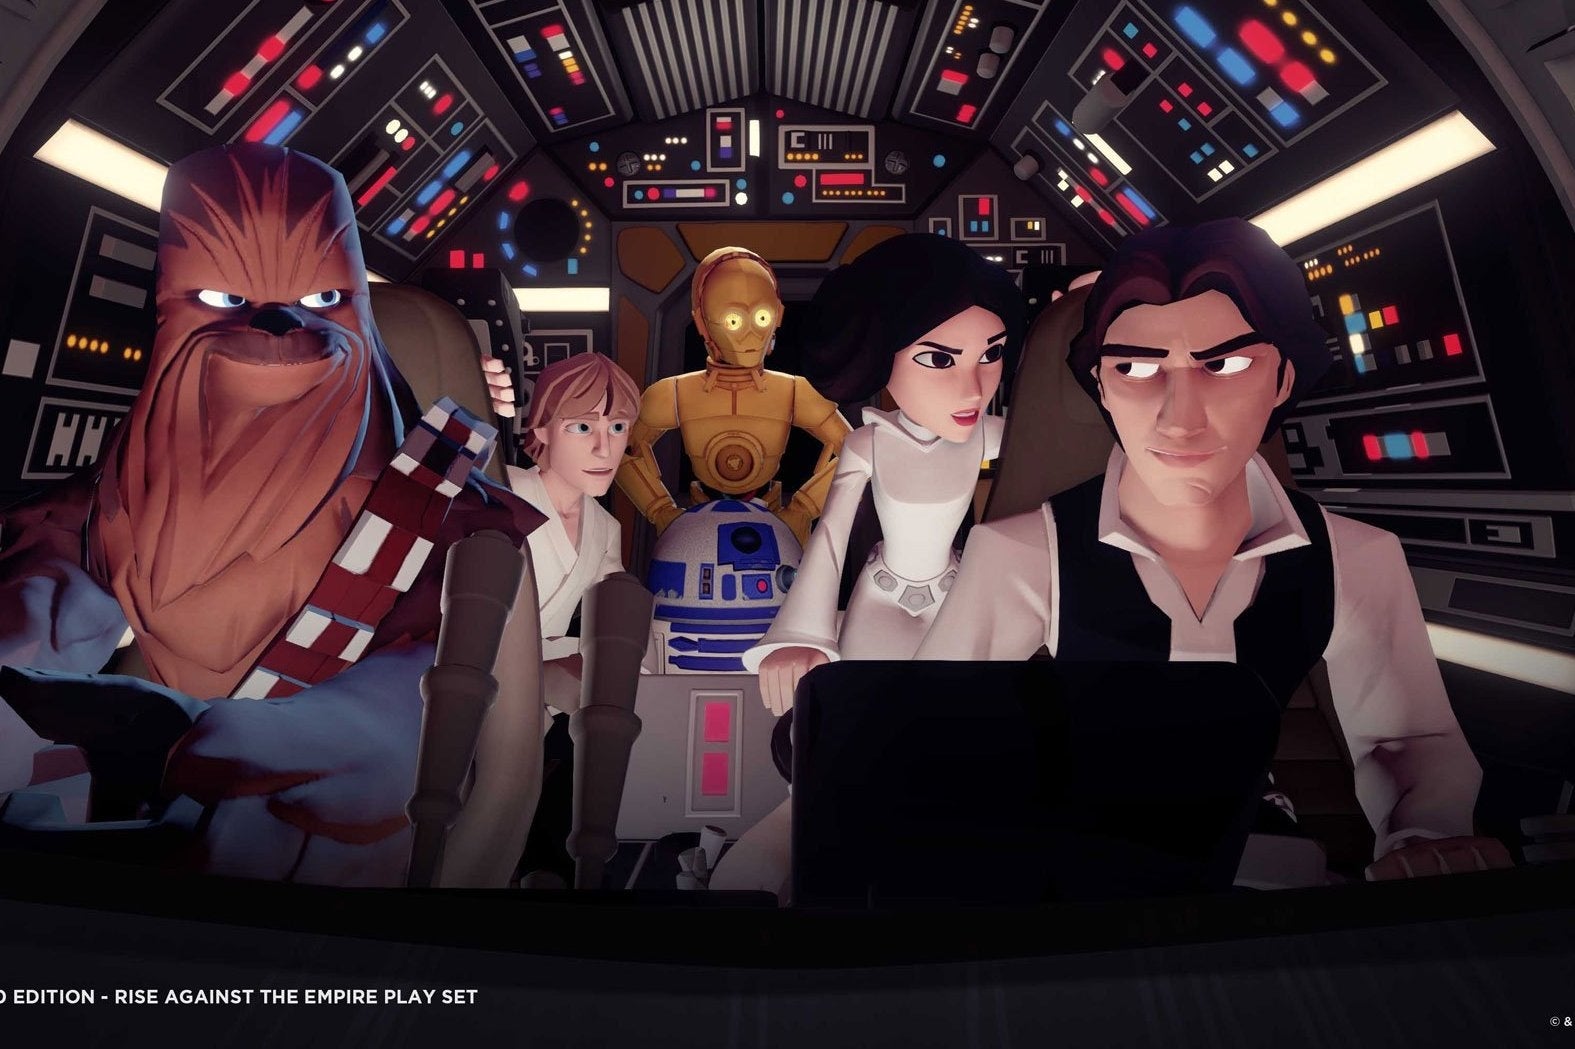 Image for Disney Infinity 3.0 includes classic, prequel and sequel Star Wars sets